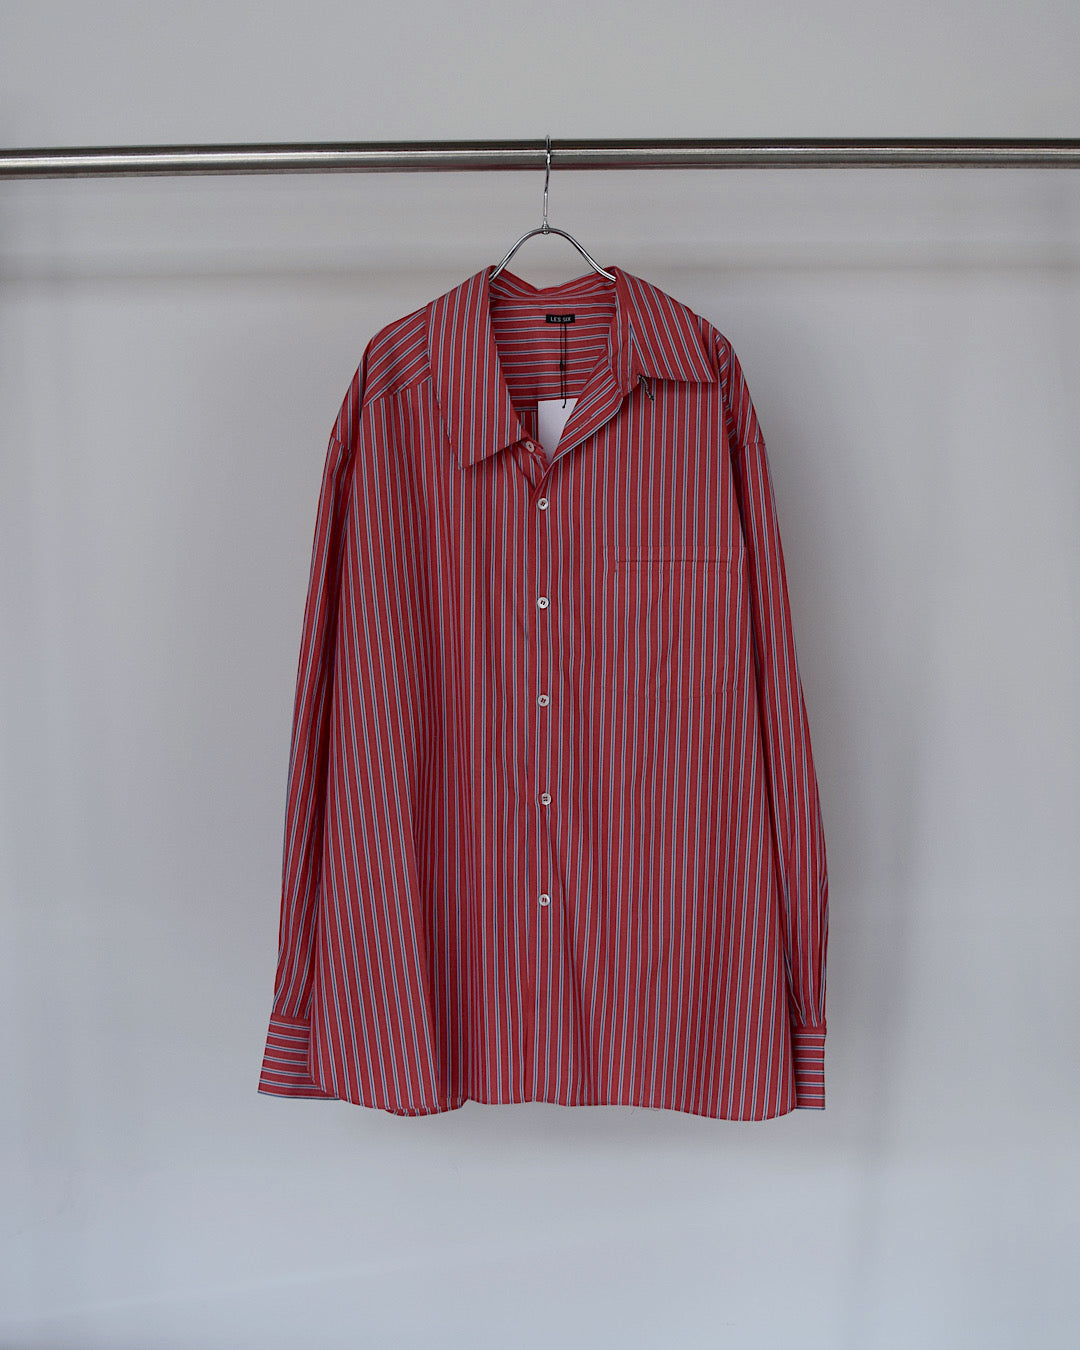 LES SIX / distorted shirt - red stripe